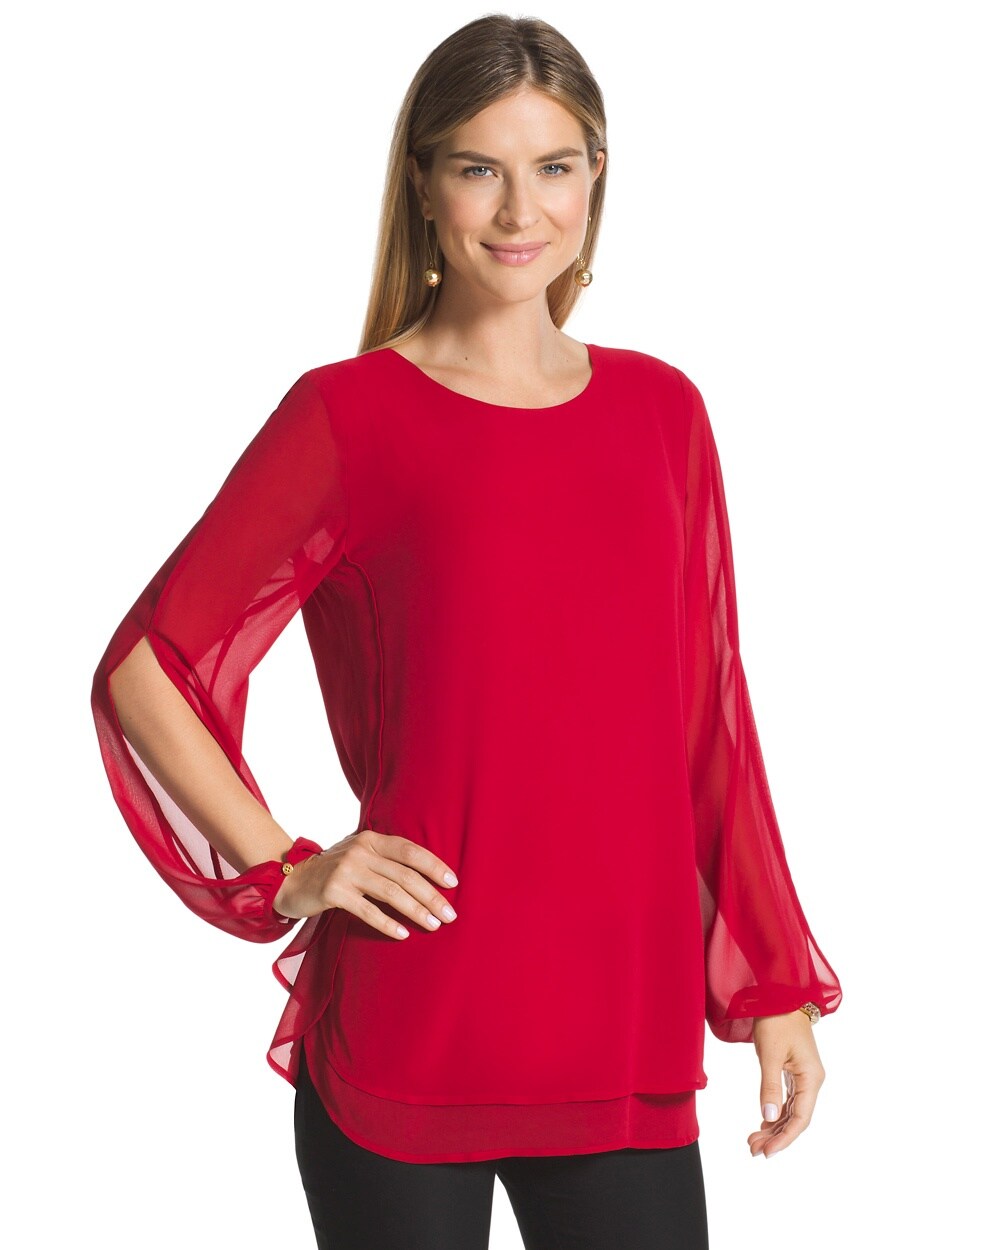 Double-Layer Amara Red Top - Chicos